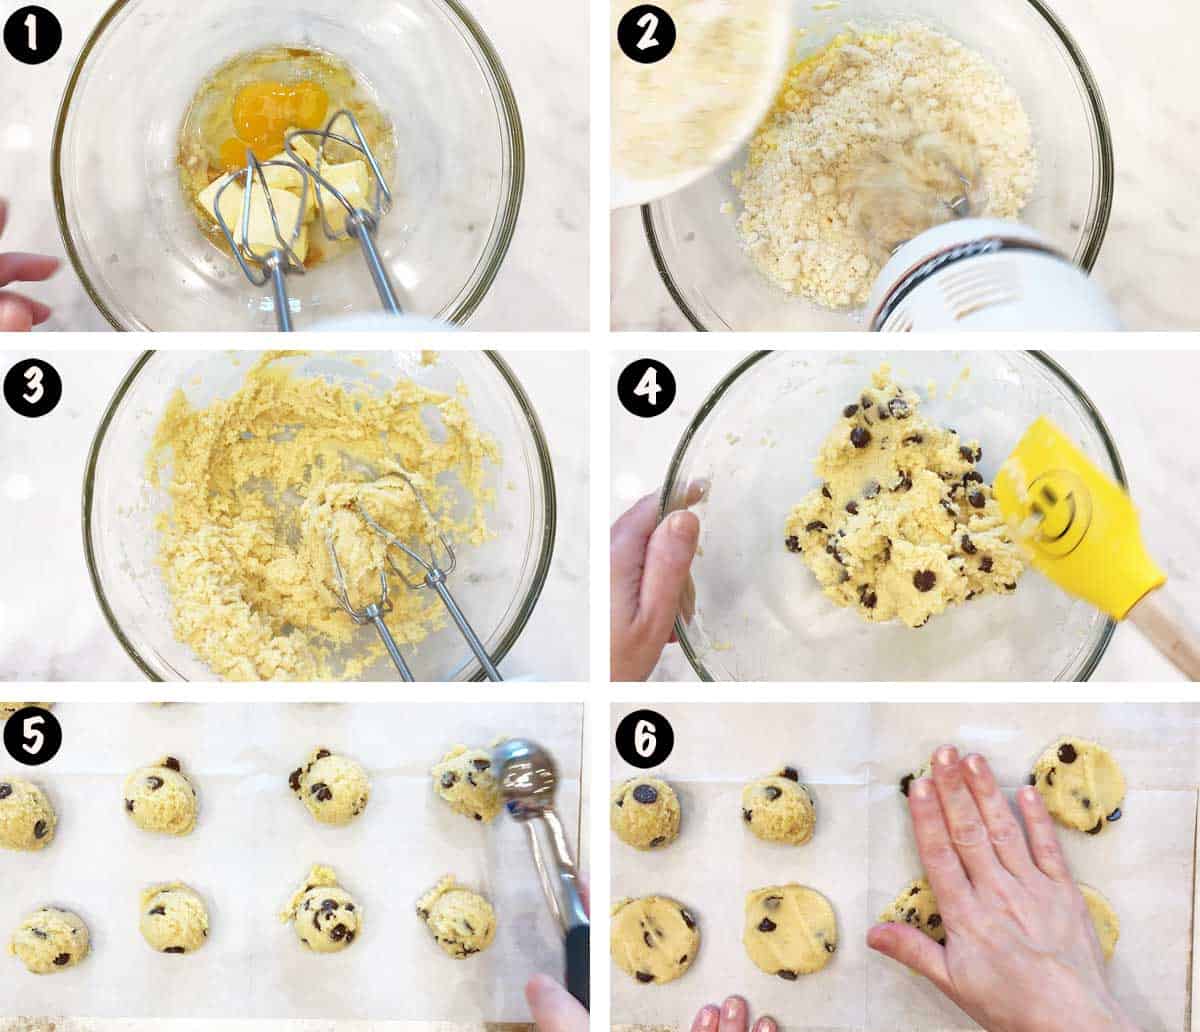 A photo collage showing the steps for baking low-carb chocolate chip cookies. 